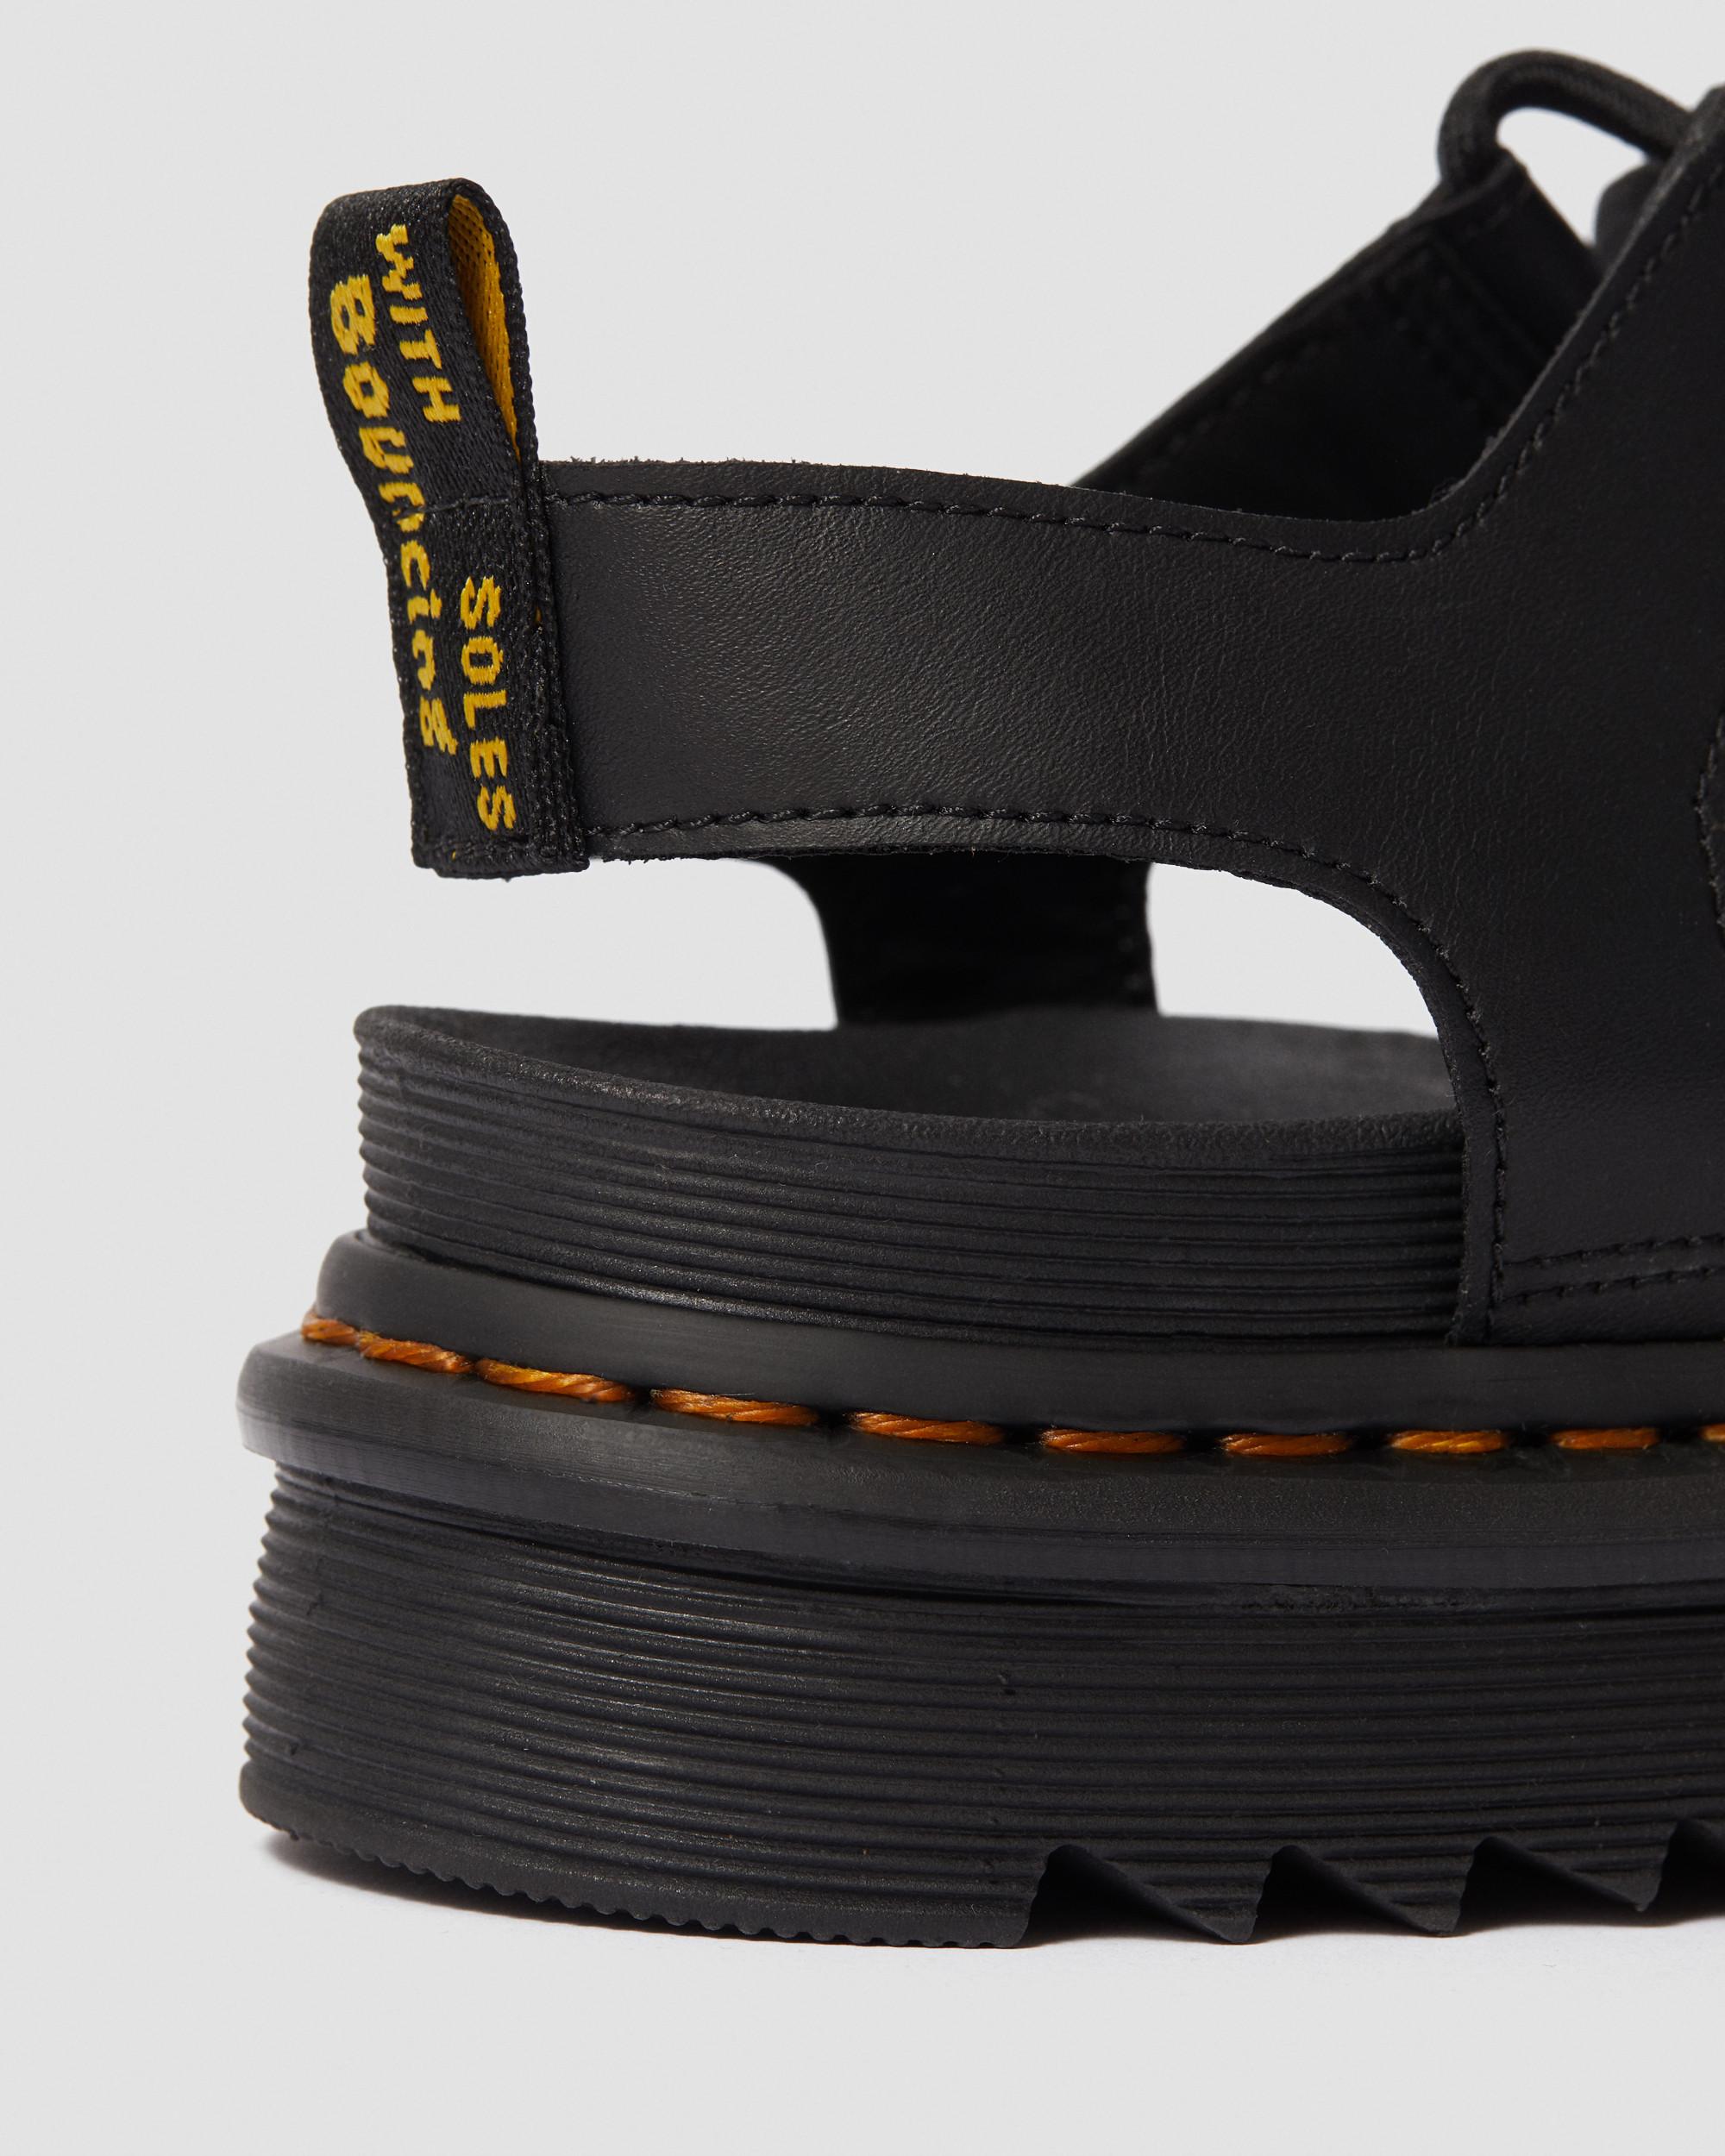 Dr Martens Womens Gladiator with Ankle-tie Sandal